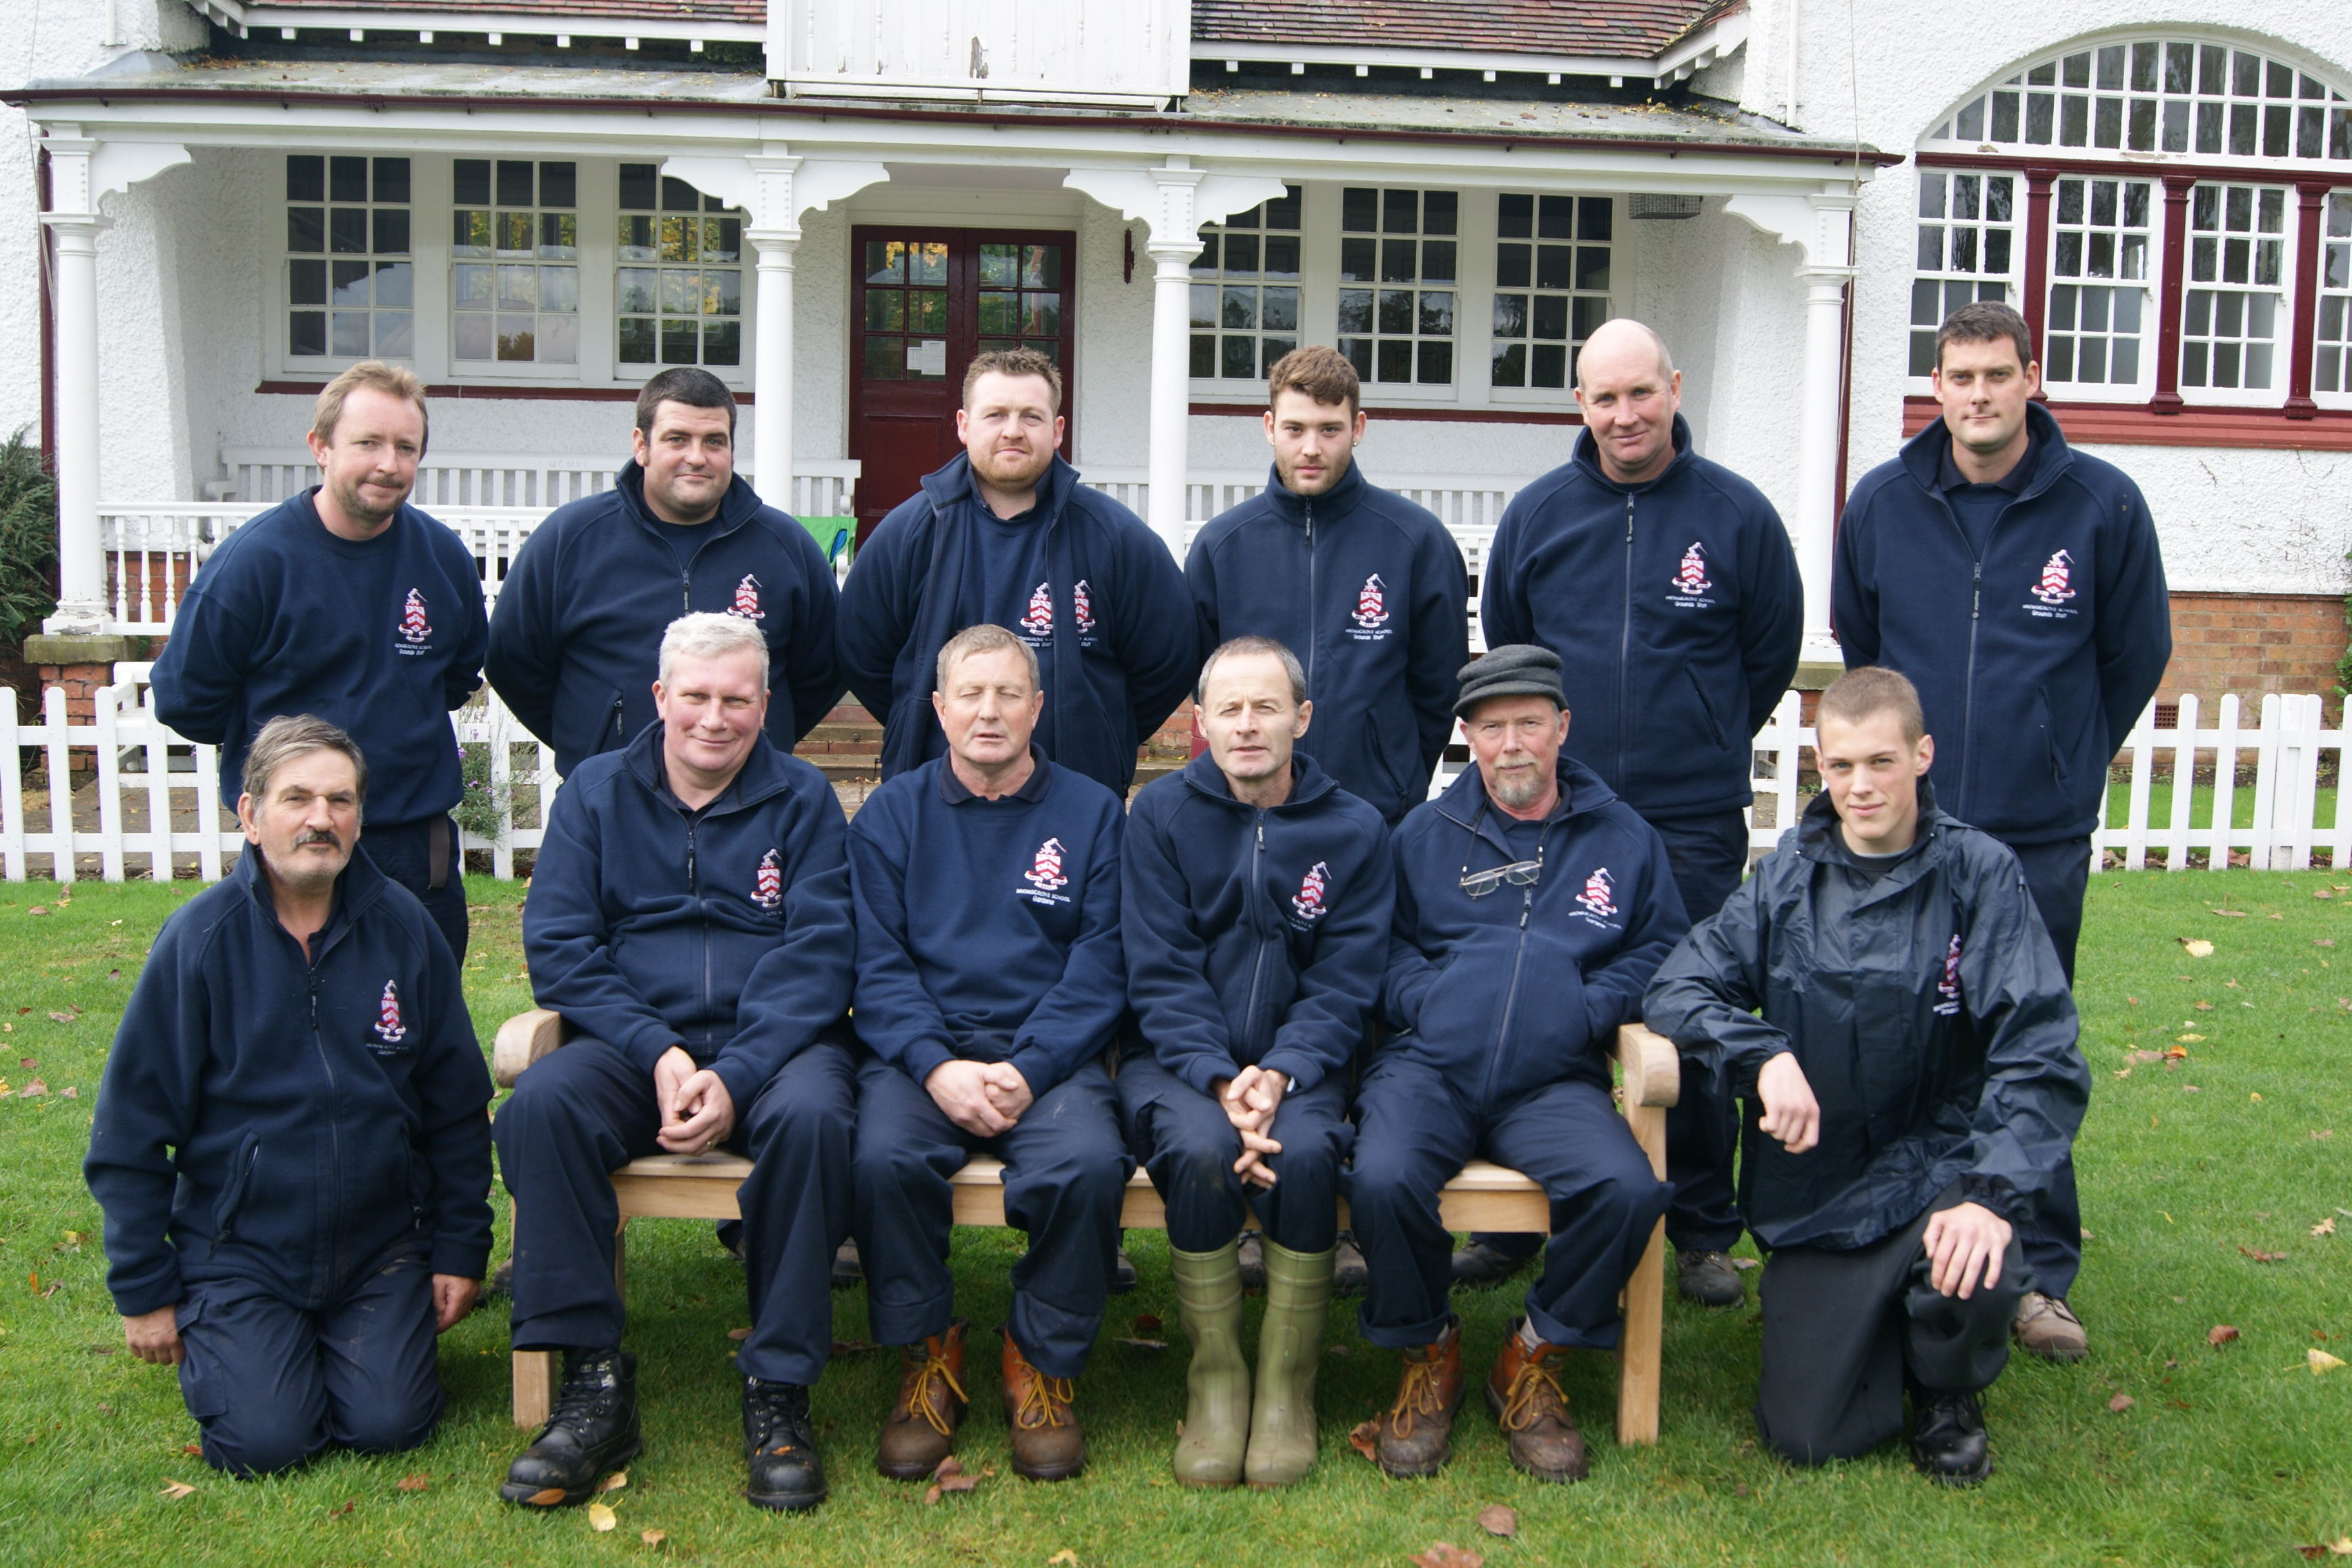 The Gardening and Grounds team